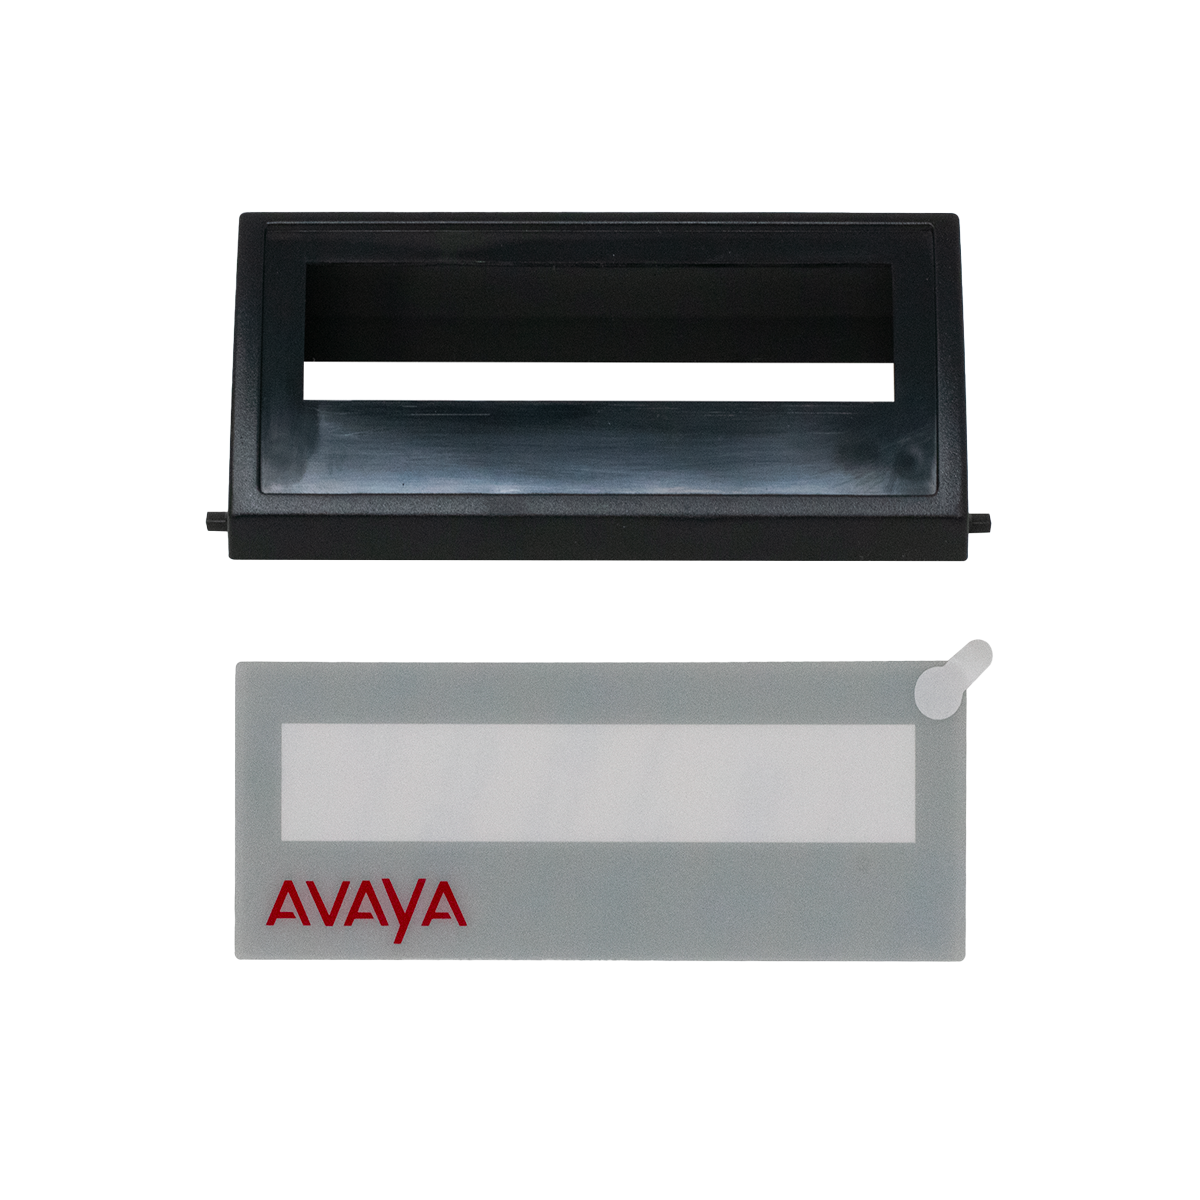 AVAYA, EURO 18D, 34D, BLACK, WITH LENS, OLD STYLE